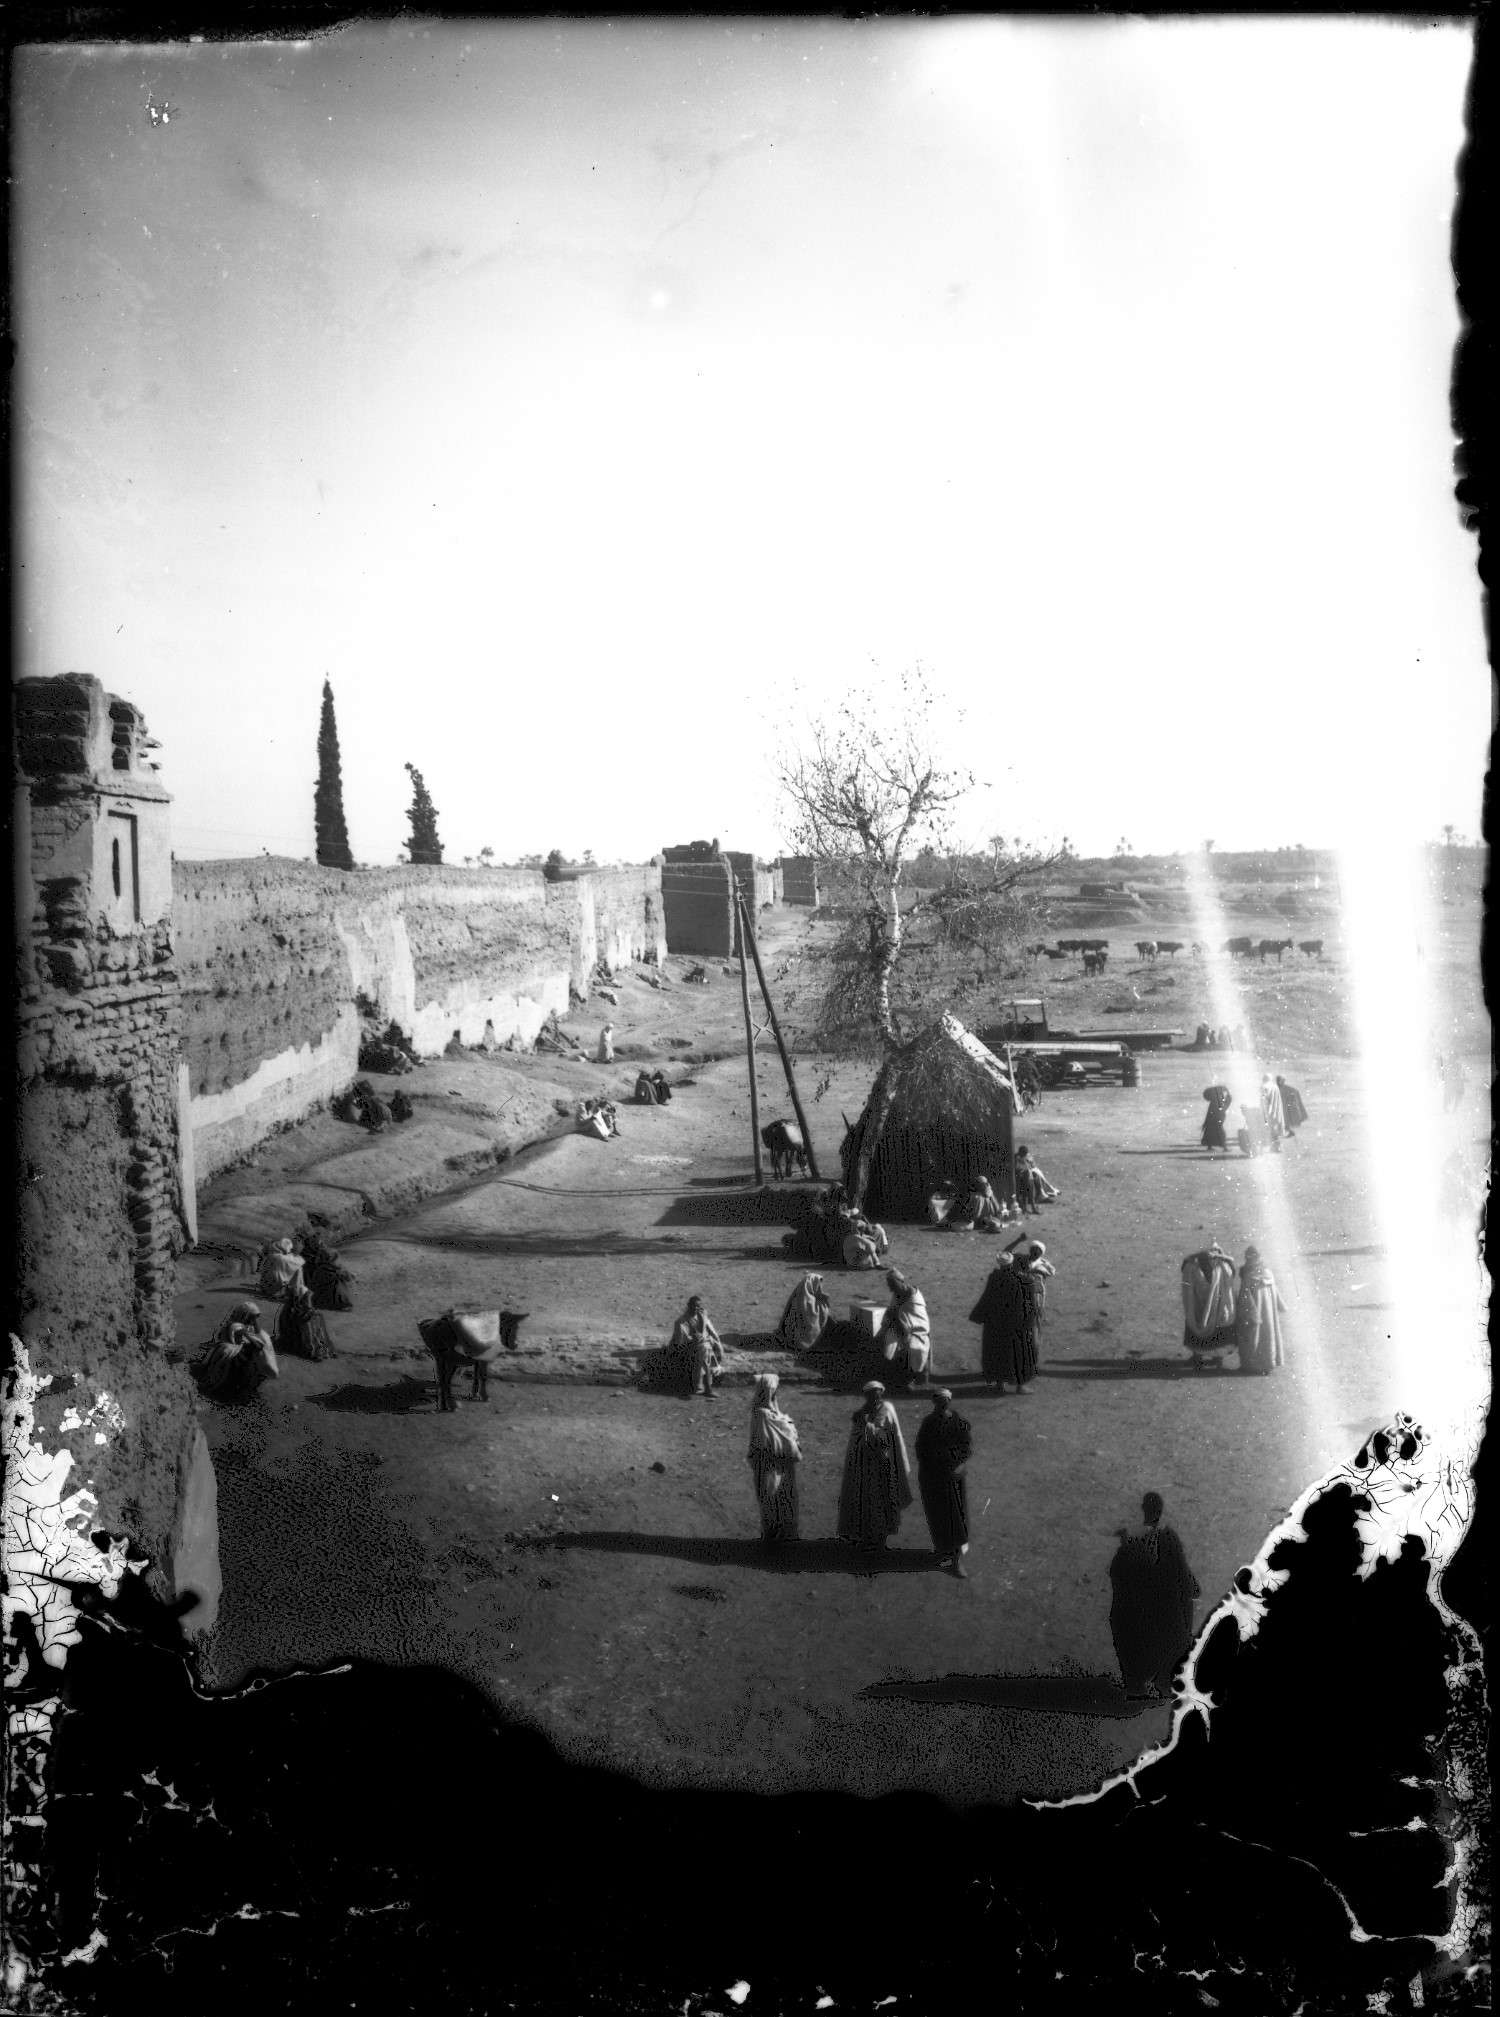 View looking down from the gate of Bab Ghmat, with people gathering and walking.